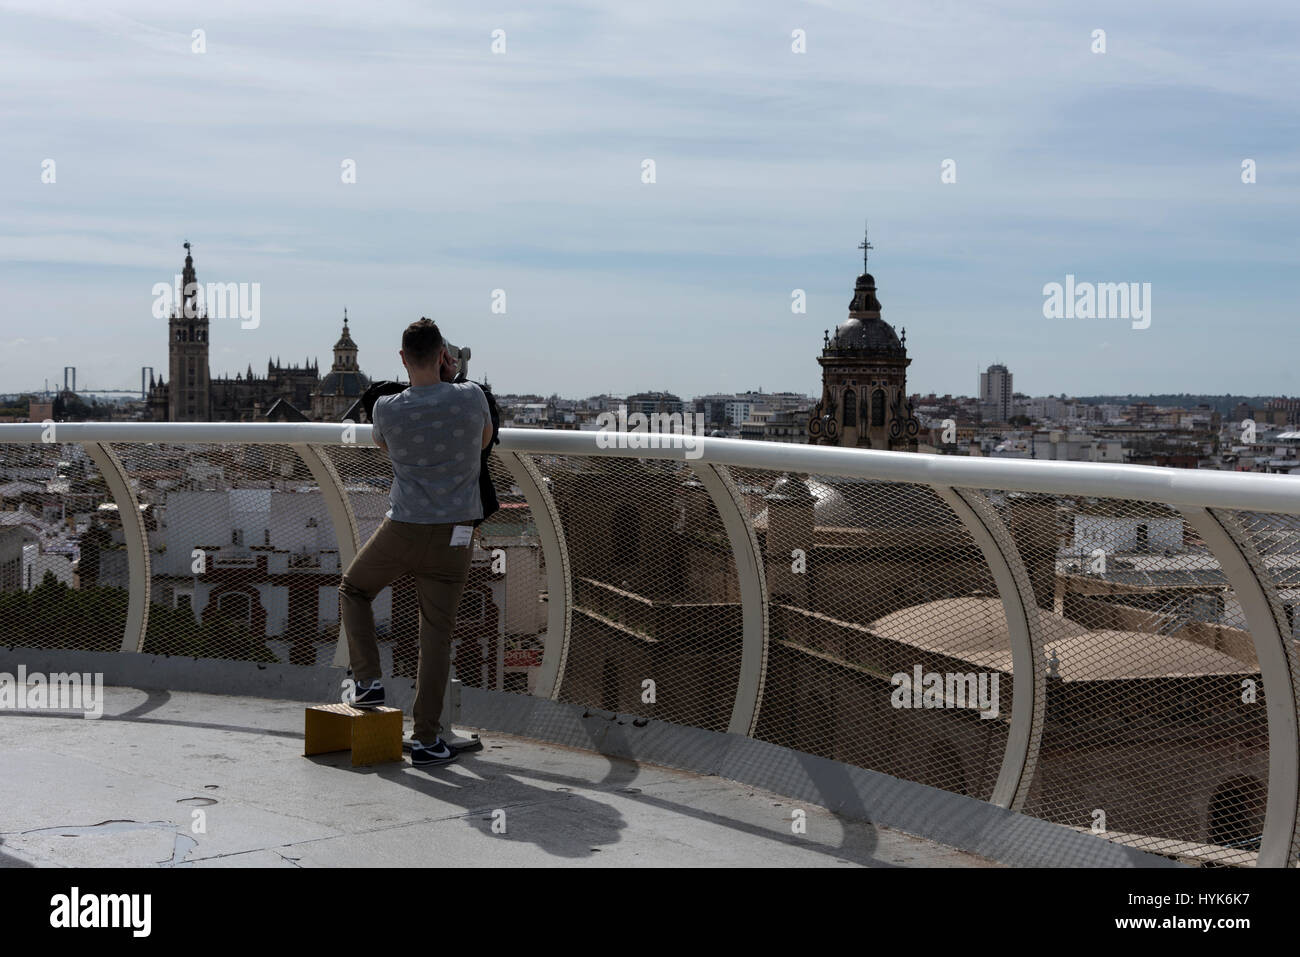 A young visitor looks through a telescope of the Seville skyline from the top of the Metropol Parasol, located at La Encarnacion Plaza (square) in the Stock Photo